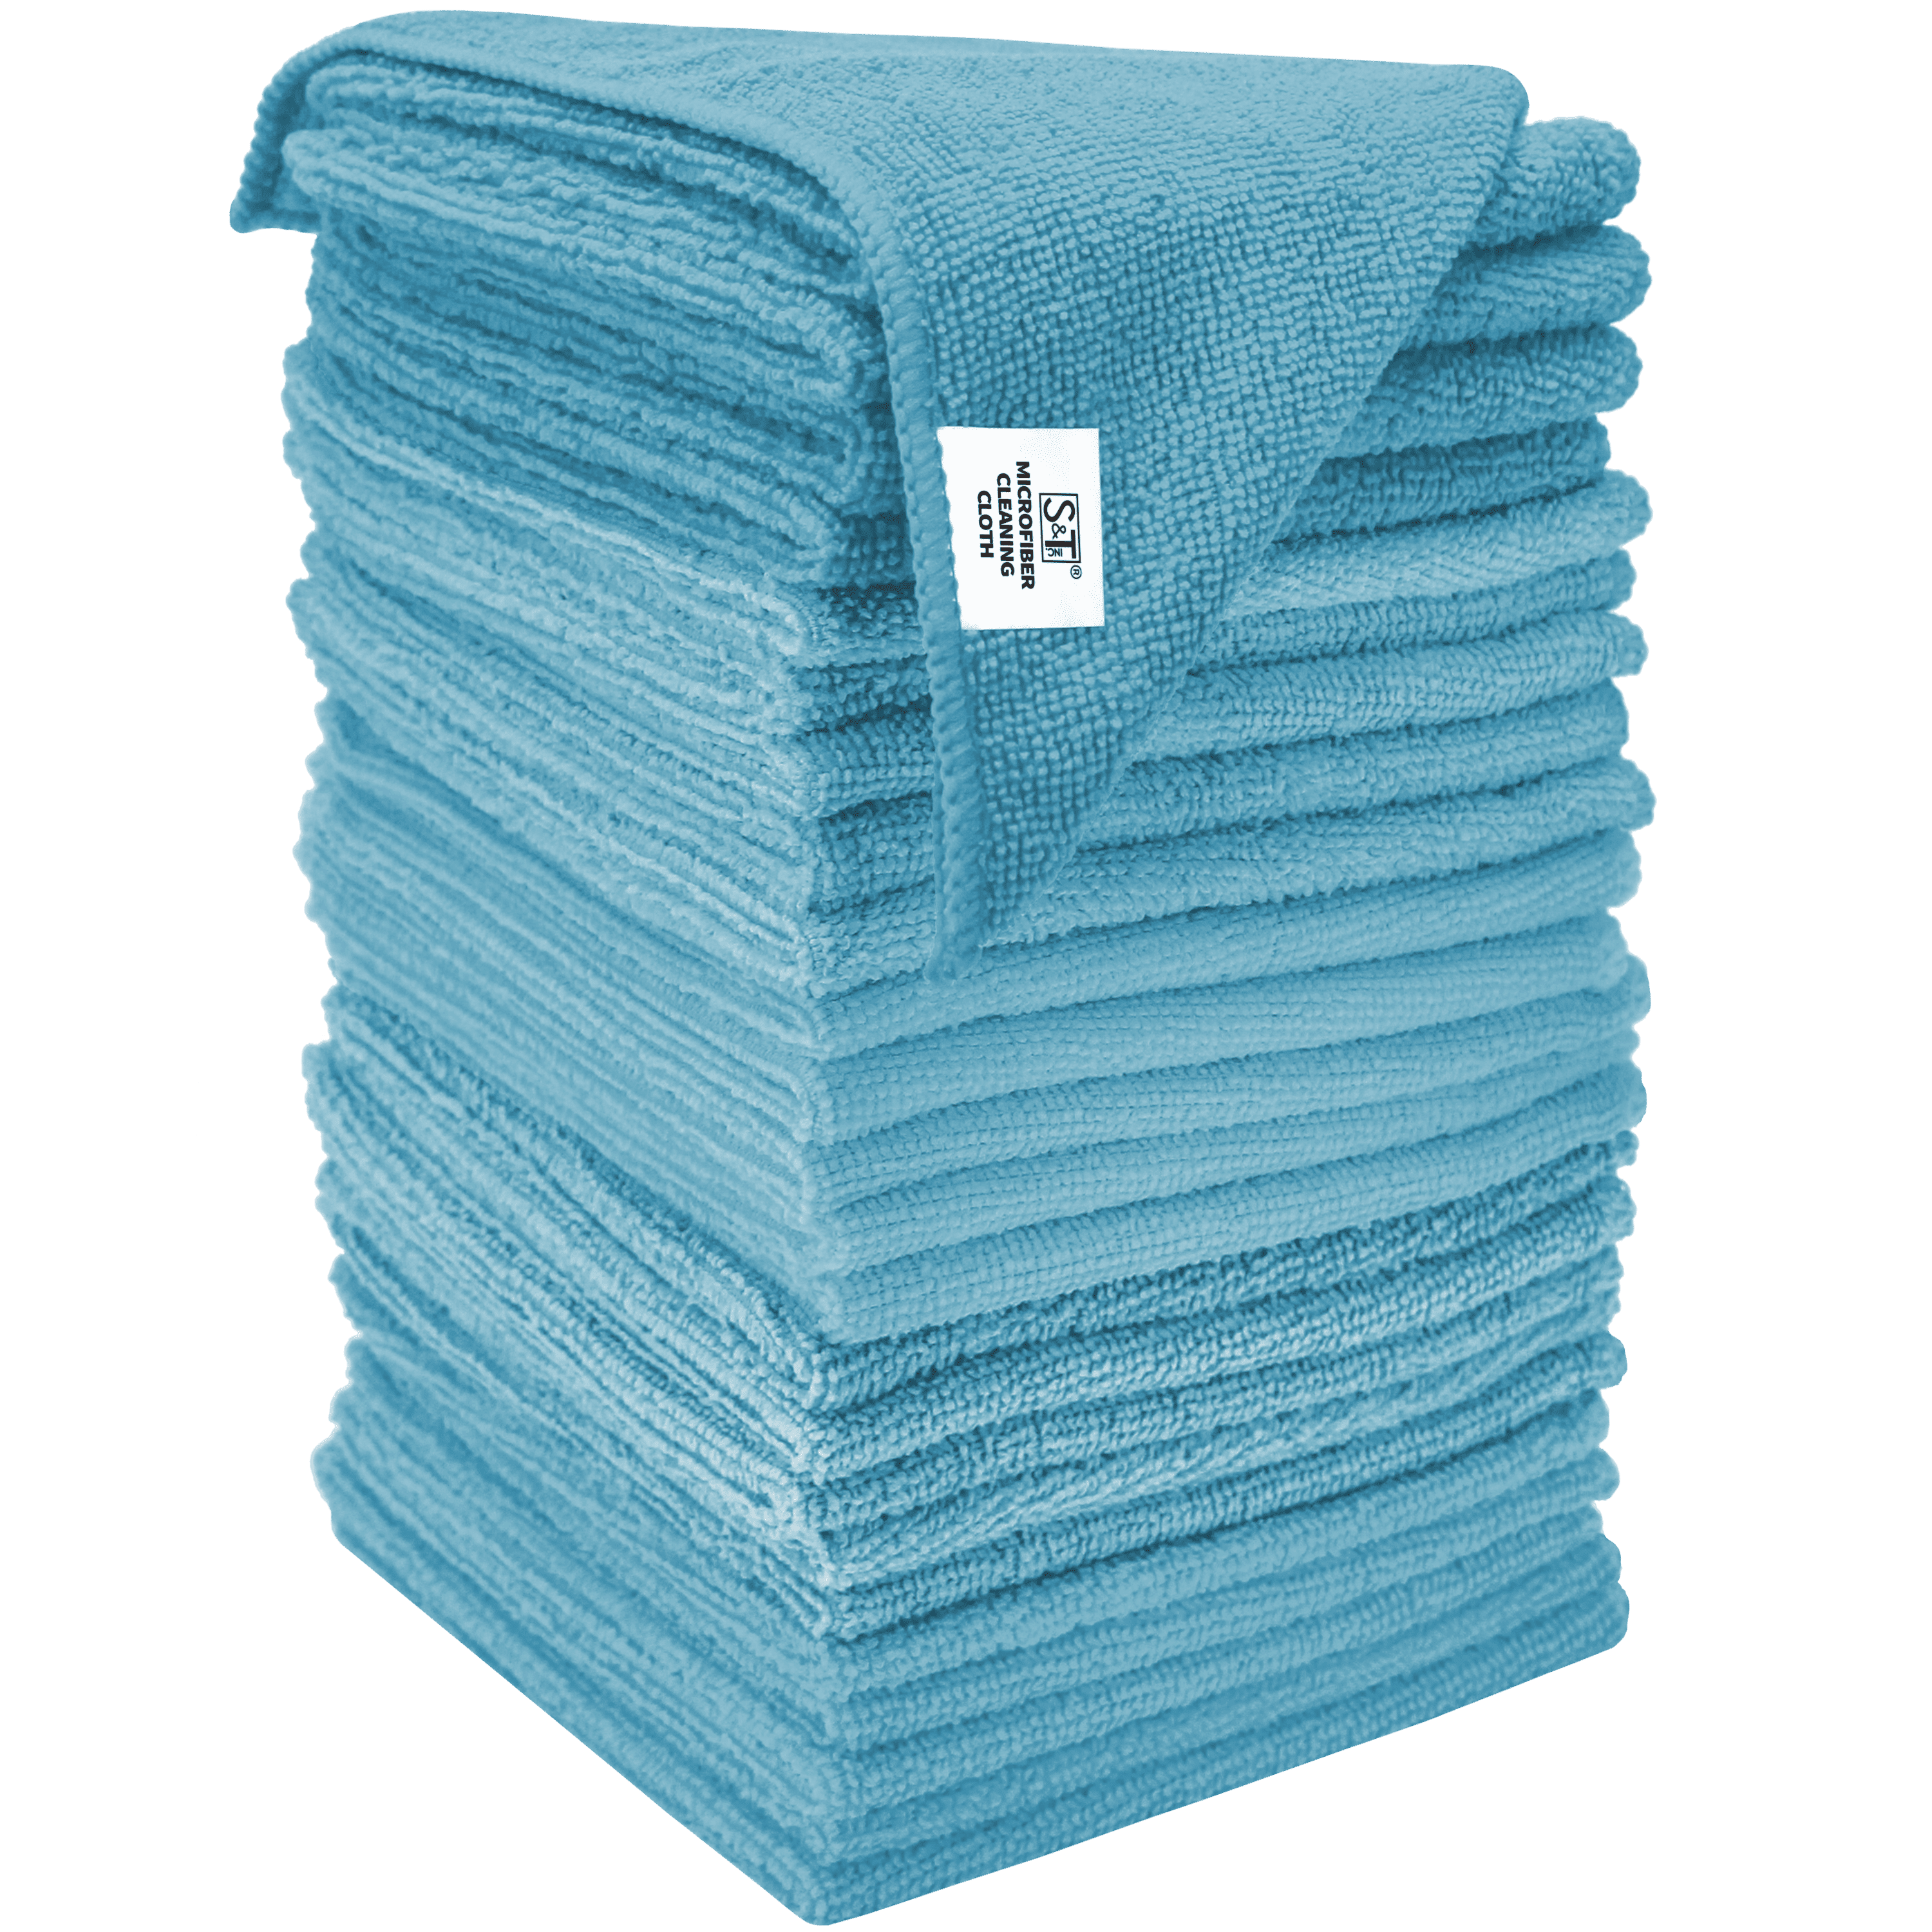 Professional Series Cleaning Towels for Dry Rite's Best Magic Microfiber Cloth 